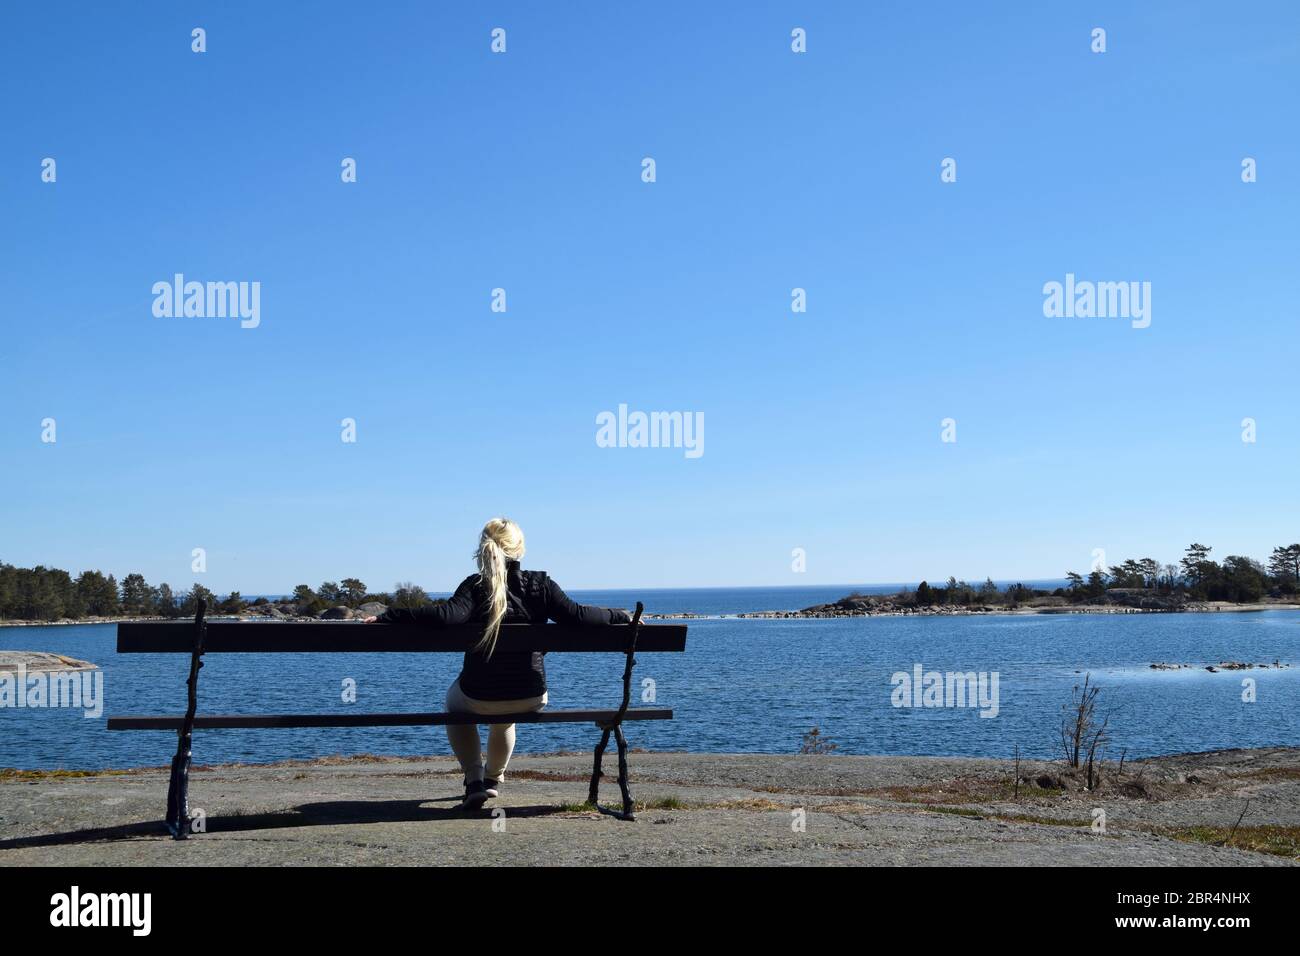 Blonde young woman, in her 30s, all alone, sitting on a bench, looking out to sea and the archipelago in Sweden on a sunny day. Stock Photo